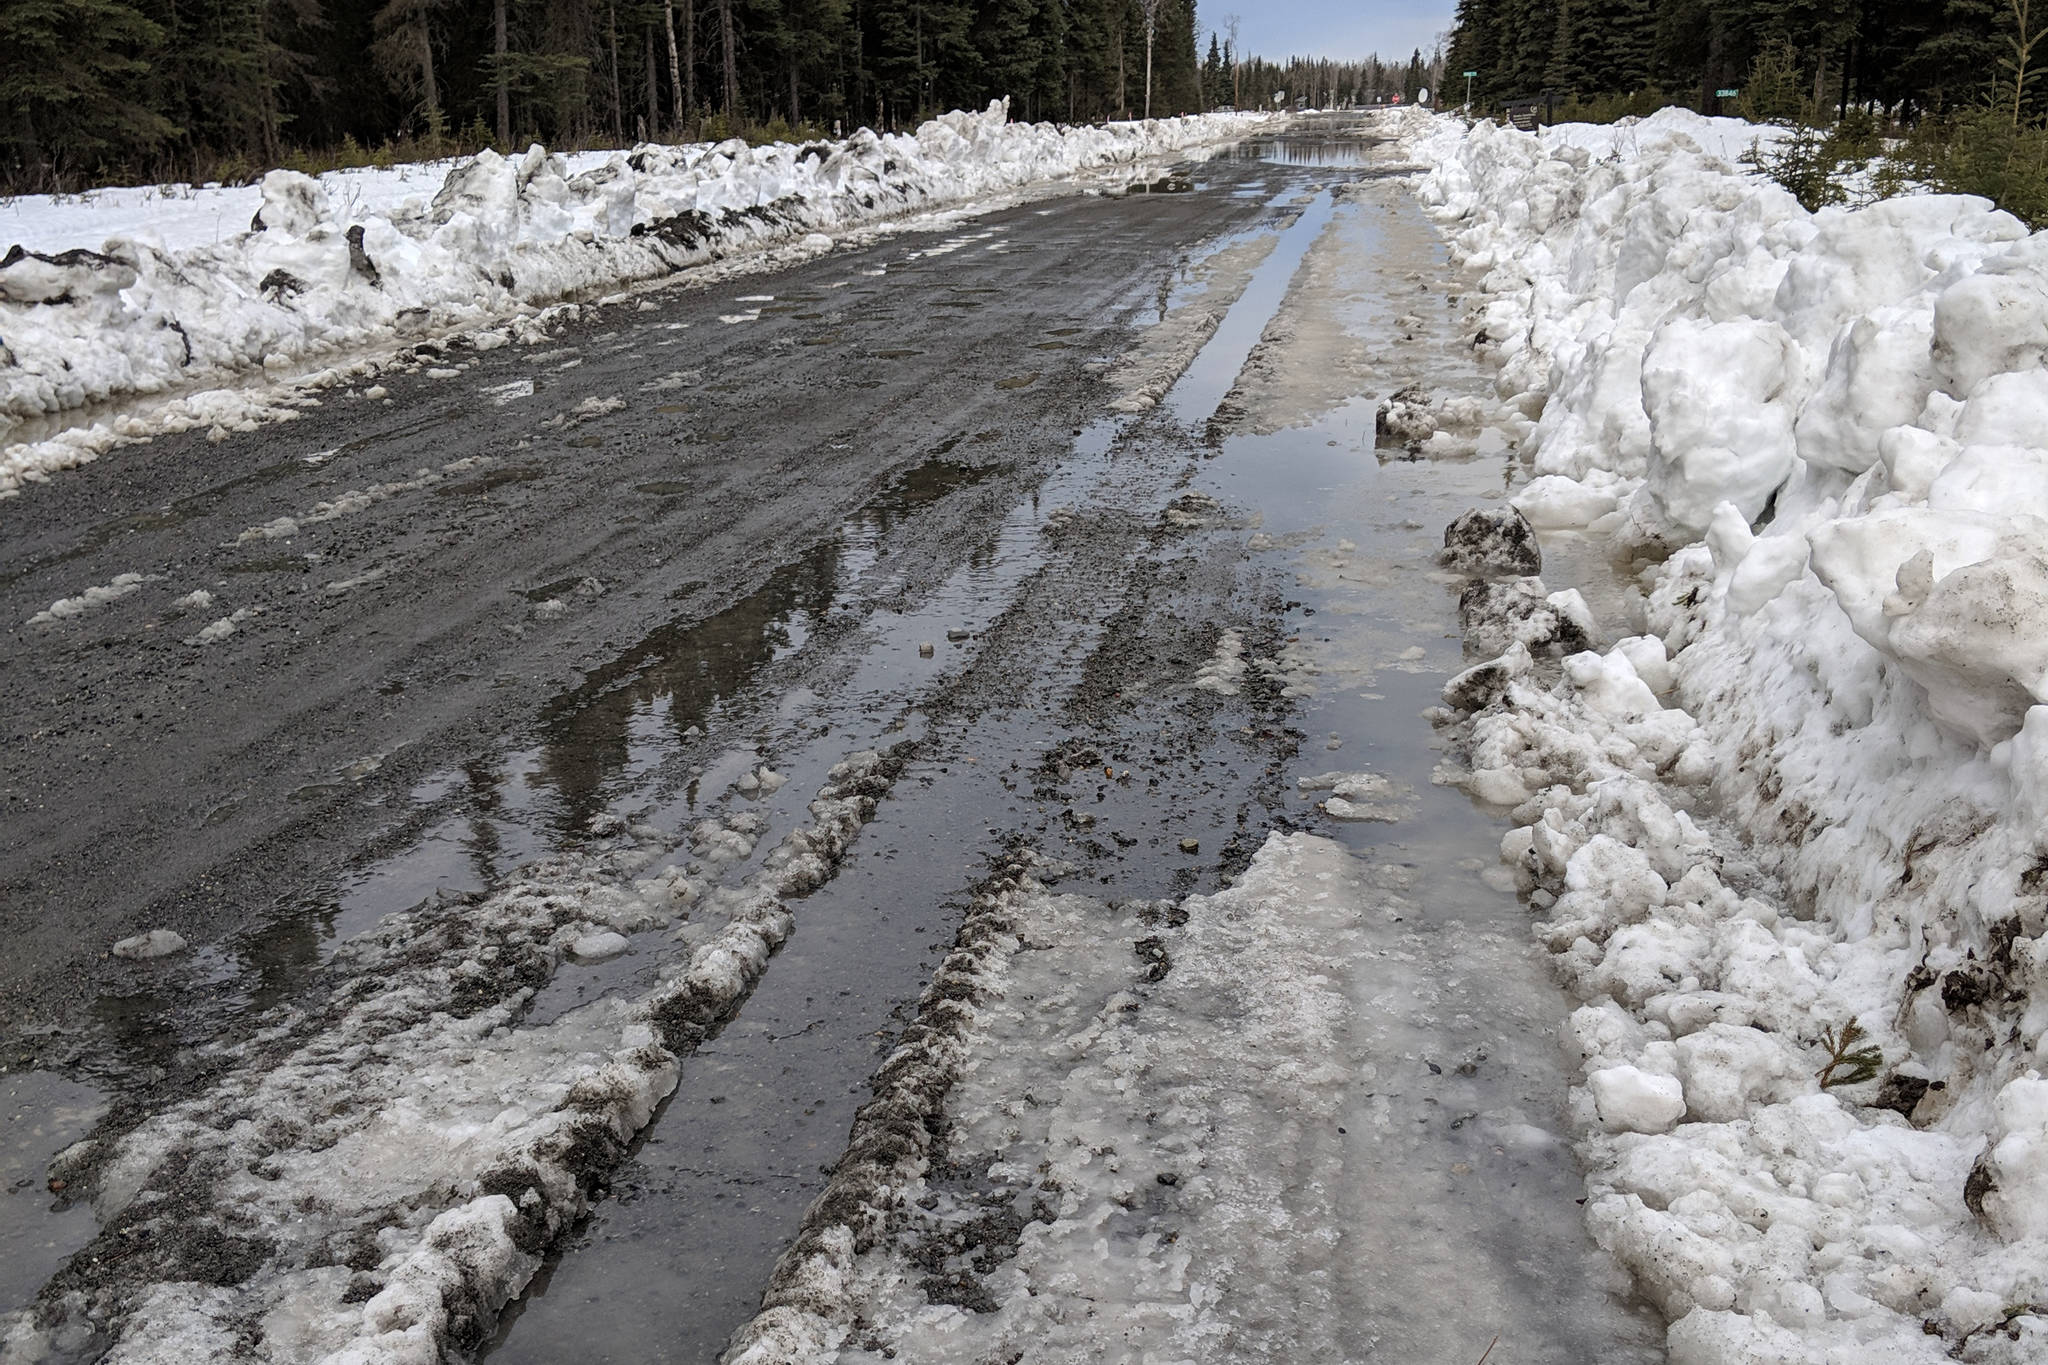 The spring thaw floods a street in Soldotna, Alaska, in March 2019. (Photo by Erin Thompson/Peninsula Clarion)